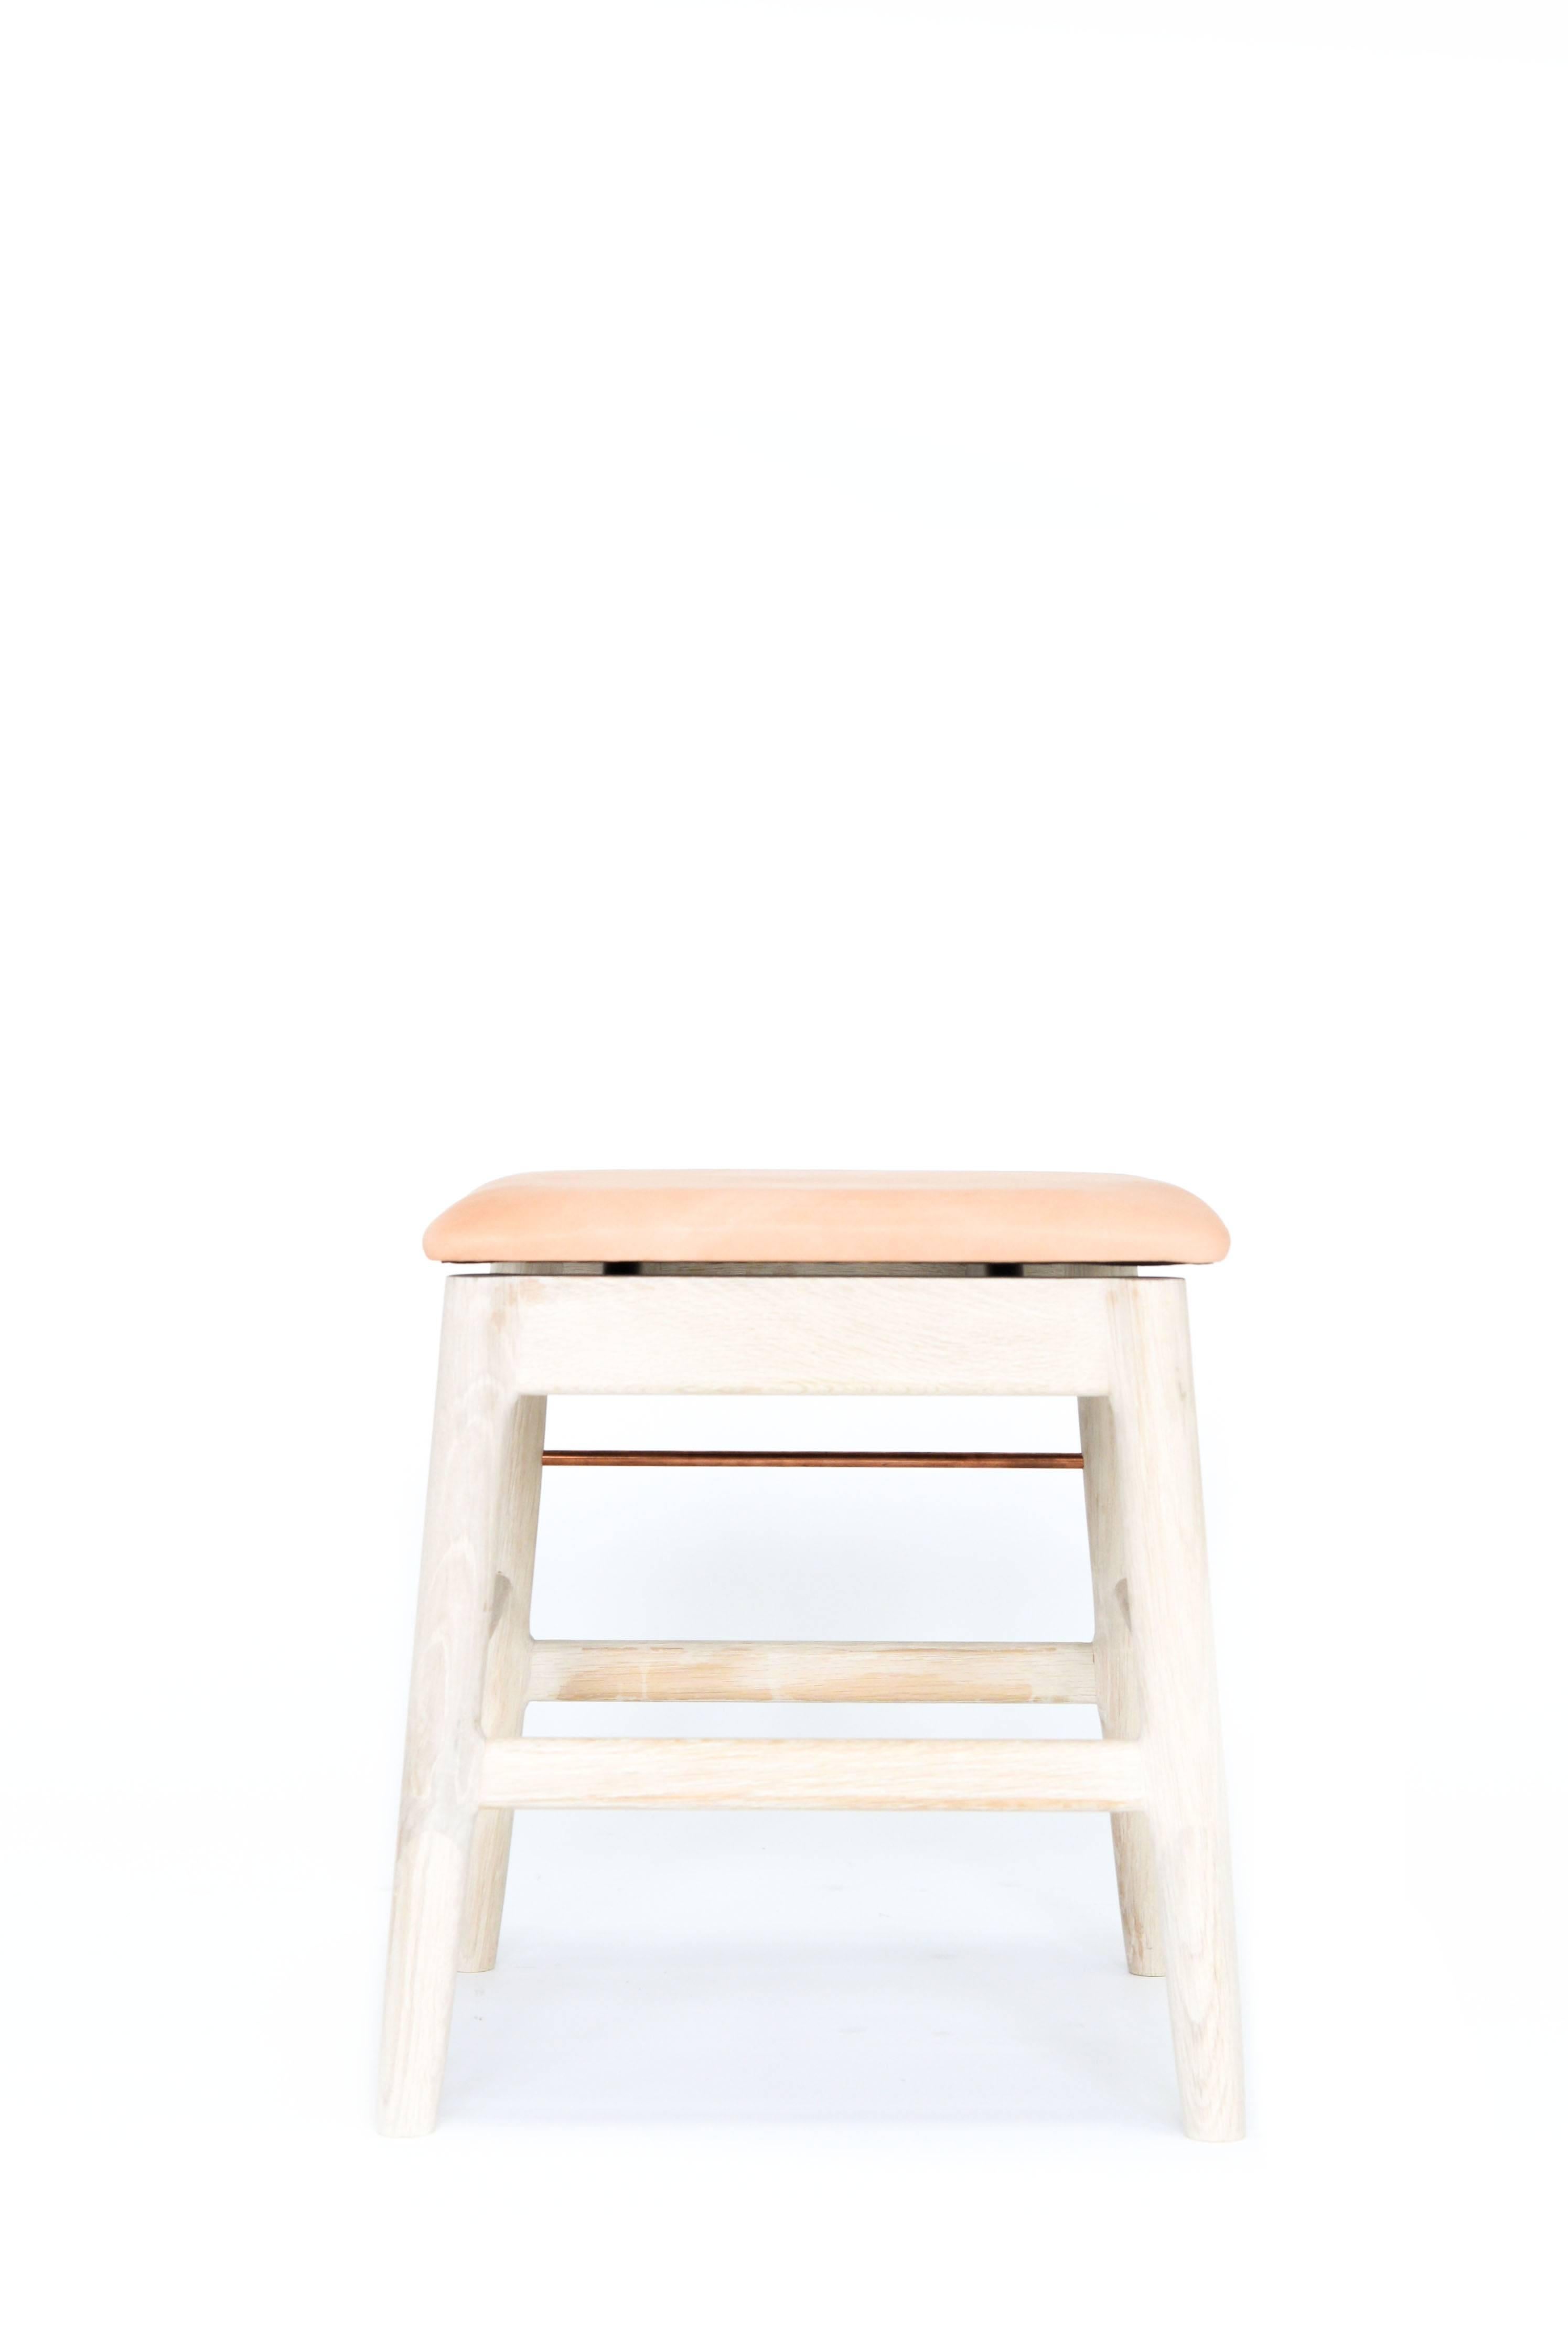 Handcrafted solid wood construction, featuring true copper or brass rods. Made in Los Angeles, California. 

Shown in white bleached oak, copper and veg tan upholstery. 

Wood type is available in ebonized oak, white oak, solid walnut, maple,